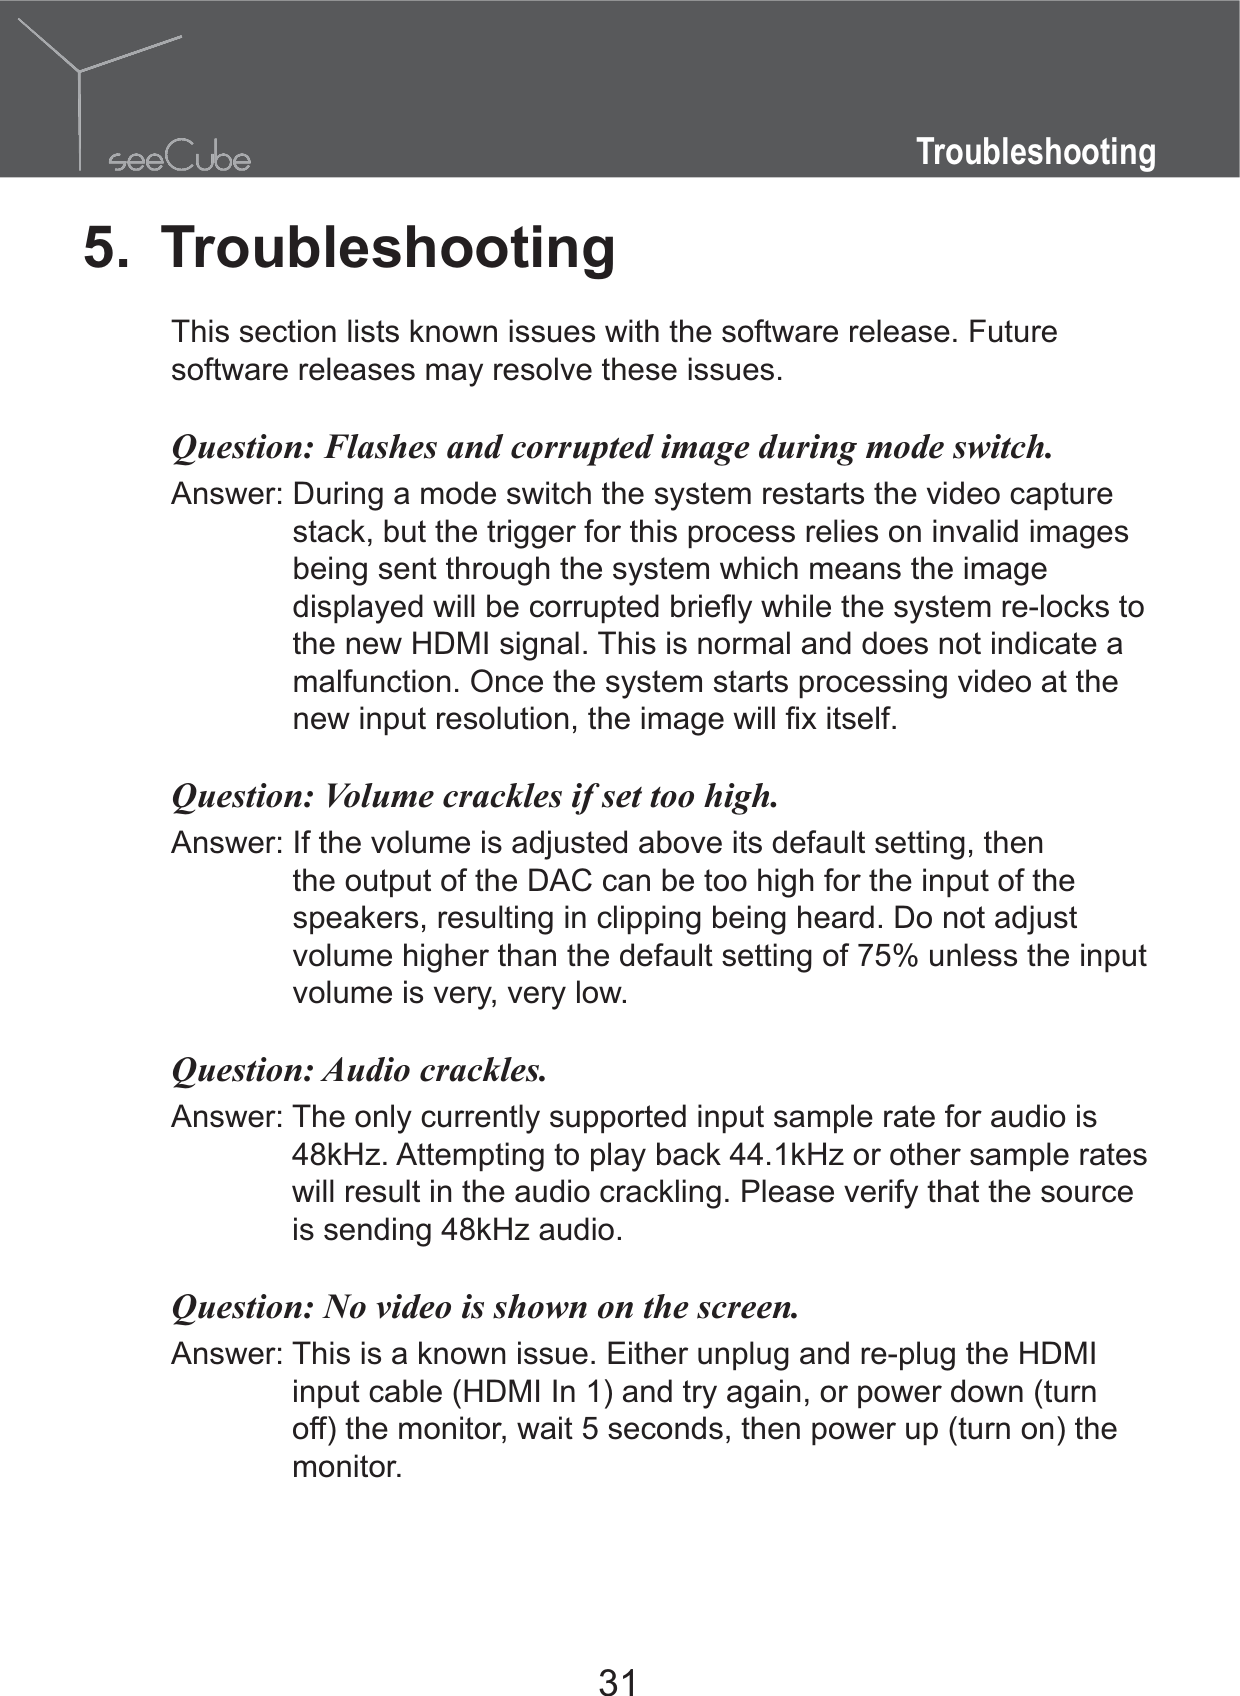 31Troubleshooting5. TroubleshootingThis section lists known issues with the software release. Future software releases may resolve these issues.Question:  Flashes and corrupted image during mode switch.Answer:  During a mode switch the system restarts the video capture stack, but the trigger for this process relies on invalid images being sent through the system which means the image the new HDMI signal. This is normal and does not indicate a malfunction. Once the system starts processing video at the Question:  Volume crackles if set too high.Answer:  If the volume is adjusted above its default setting, then the output of the DAC can be too high for the input of the speakers, resulting in clipping being heard. Do not adjust volume higher than the default setting of 75% unless the input volume is very, very low.Question:  Audio crackles.Answer:  The only currently supported input sample rate for audio is 48kHz. Attempting to play back 44.1kHz or other sample rates will result in the audio crackling. Please verify that the source is sending 48kHz audio.Question:  No video is shown on the screen.Answer:  This is a known issue. Either unplug and re-plug the HDMI input cable (HDMI In 1) and try again, or power down (turn off) the monitor, wait 5 seconds, then power up (turn on) the monitor.